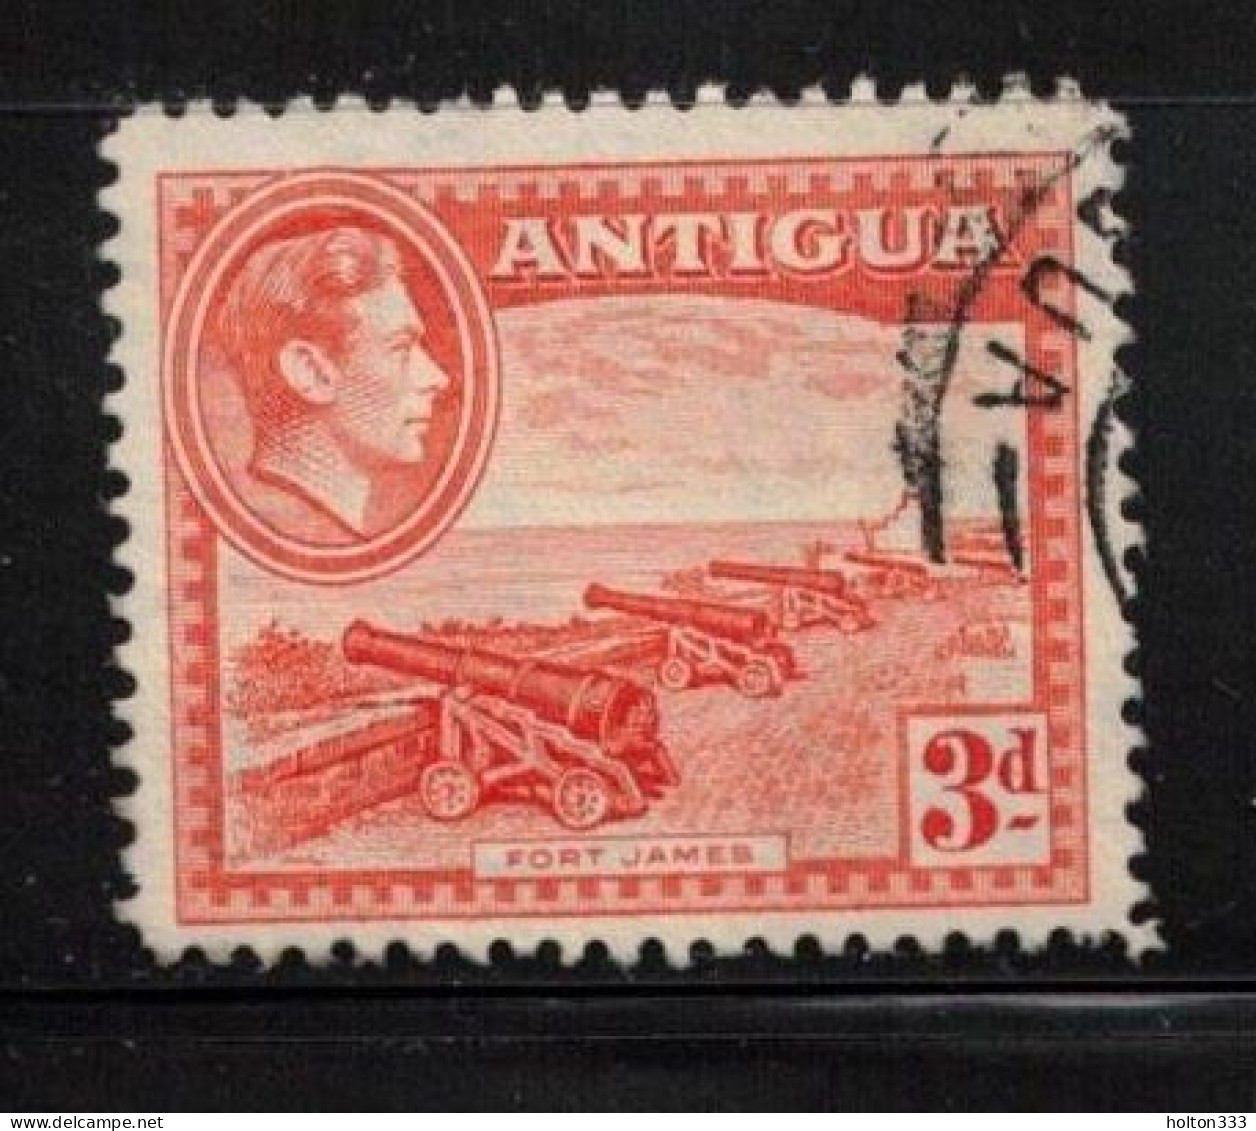 ANTIGUA Scott # 89 Used - KGVI & Cannons At Fort James - 1858-1960 Colonia Británica